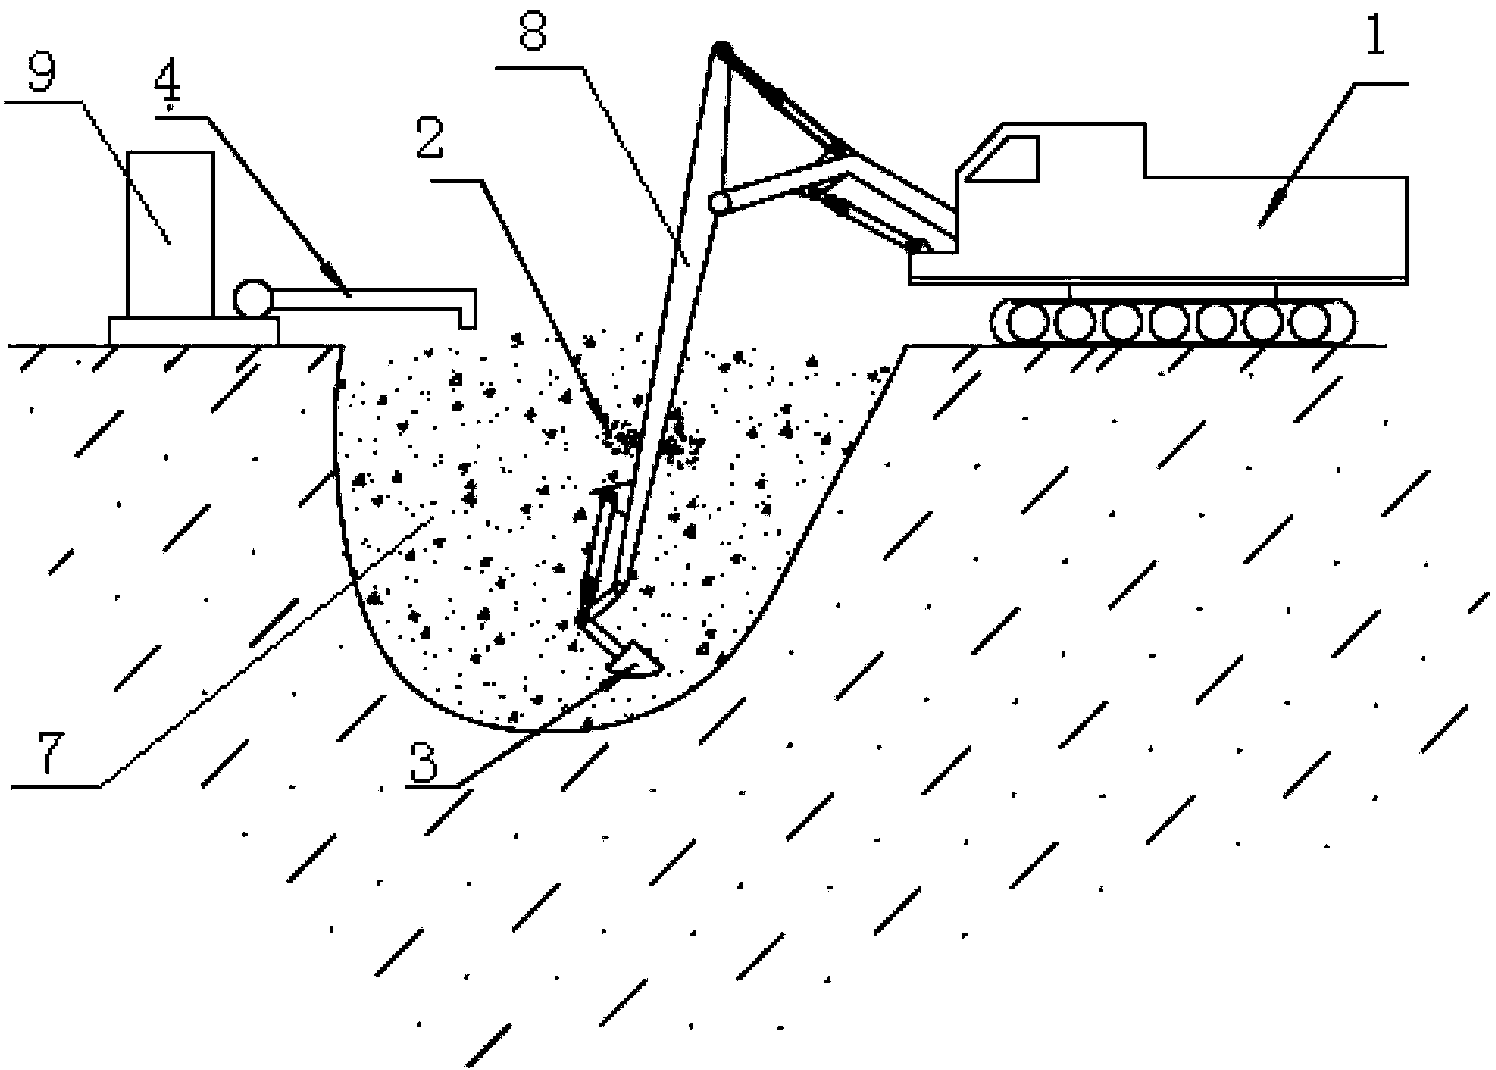 Bucket hob wheel and cement stirring combined earth-rock gravity wall construction method